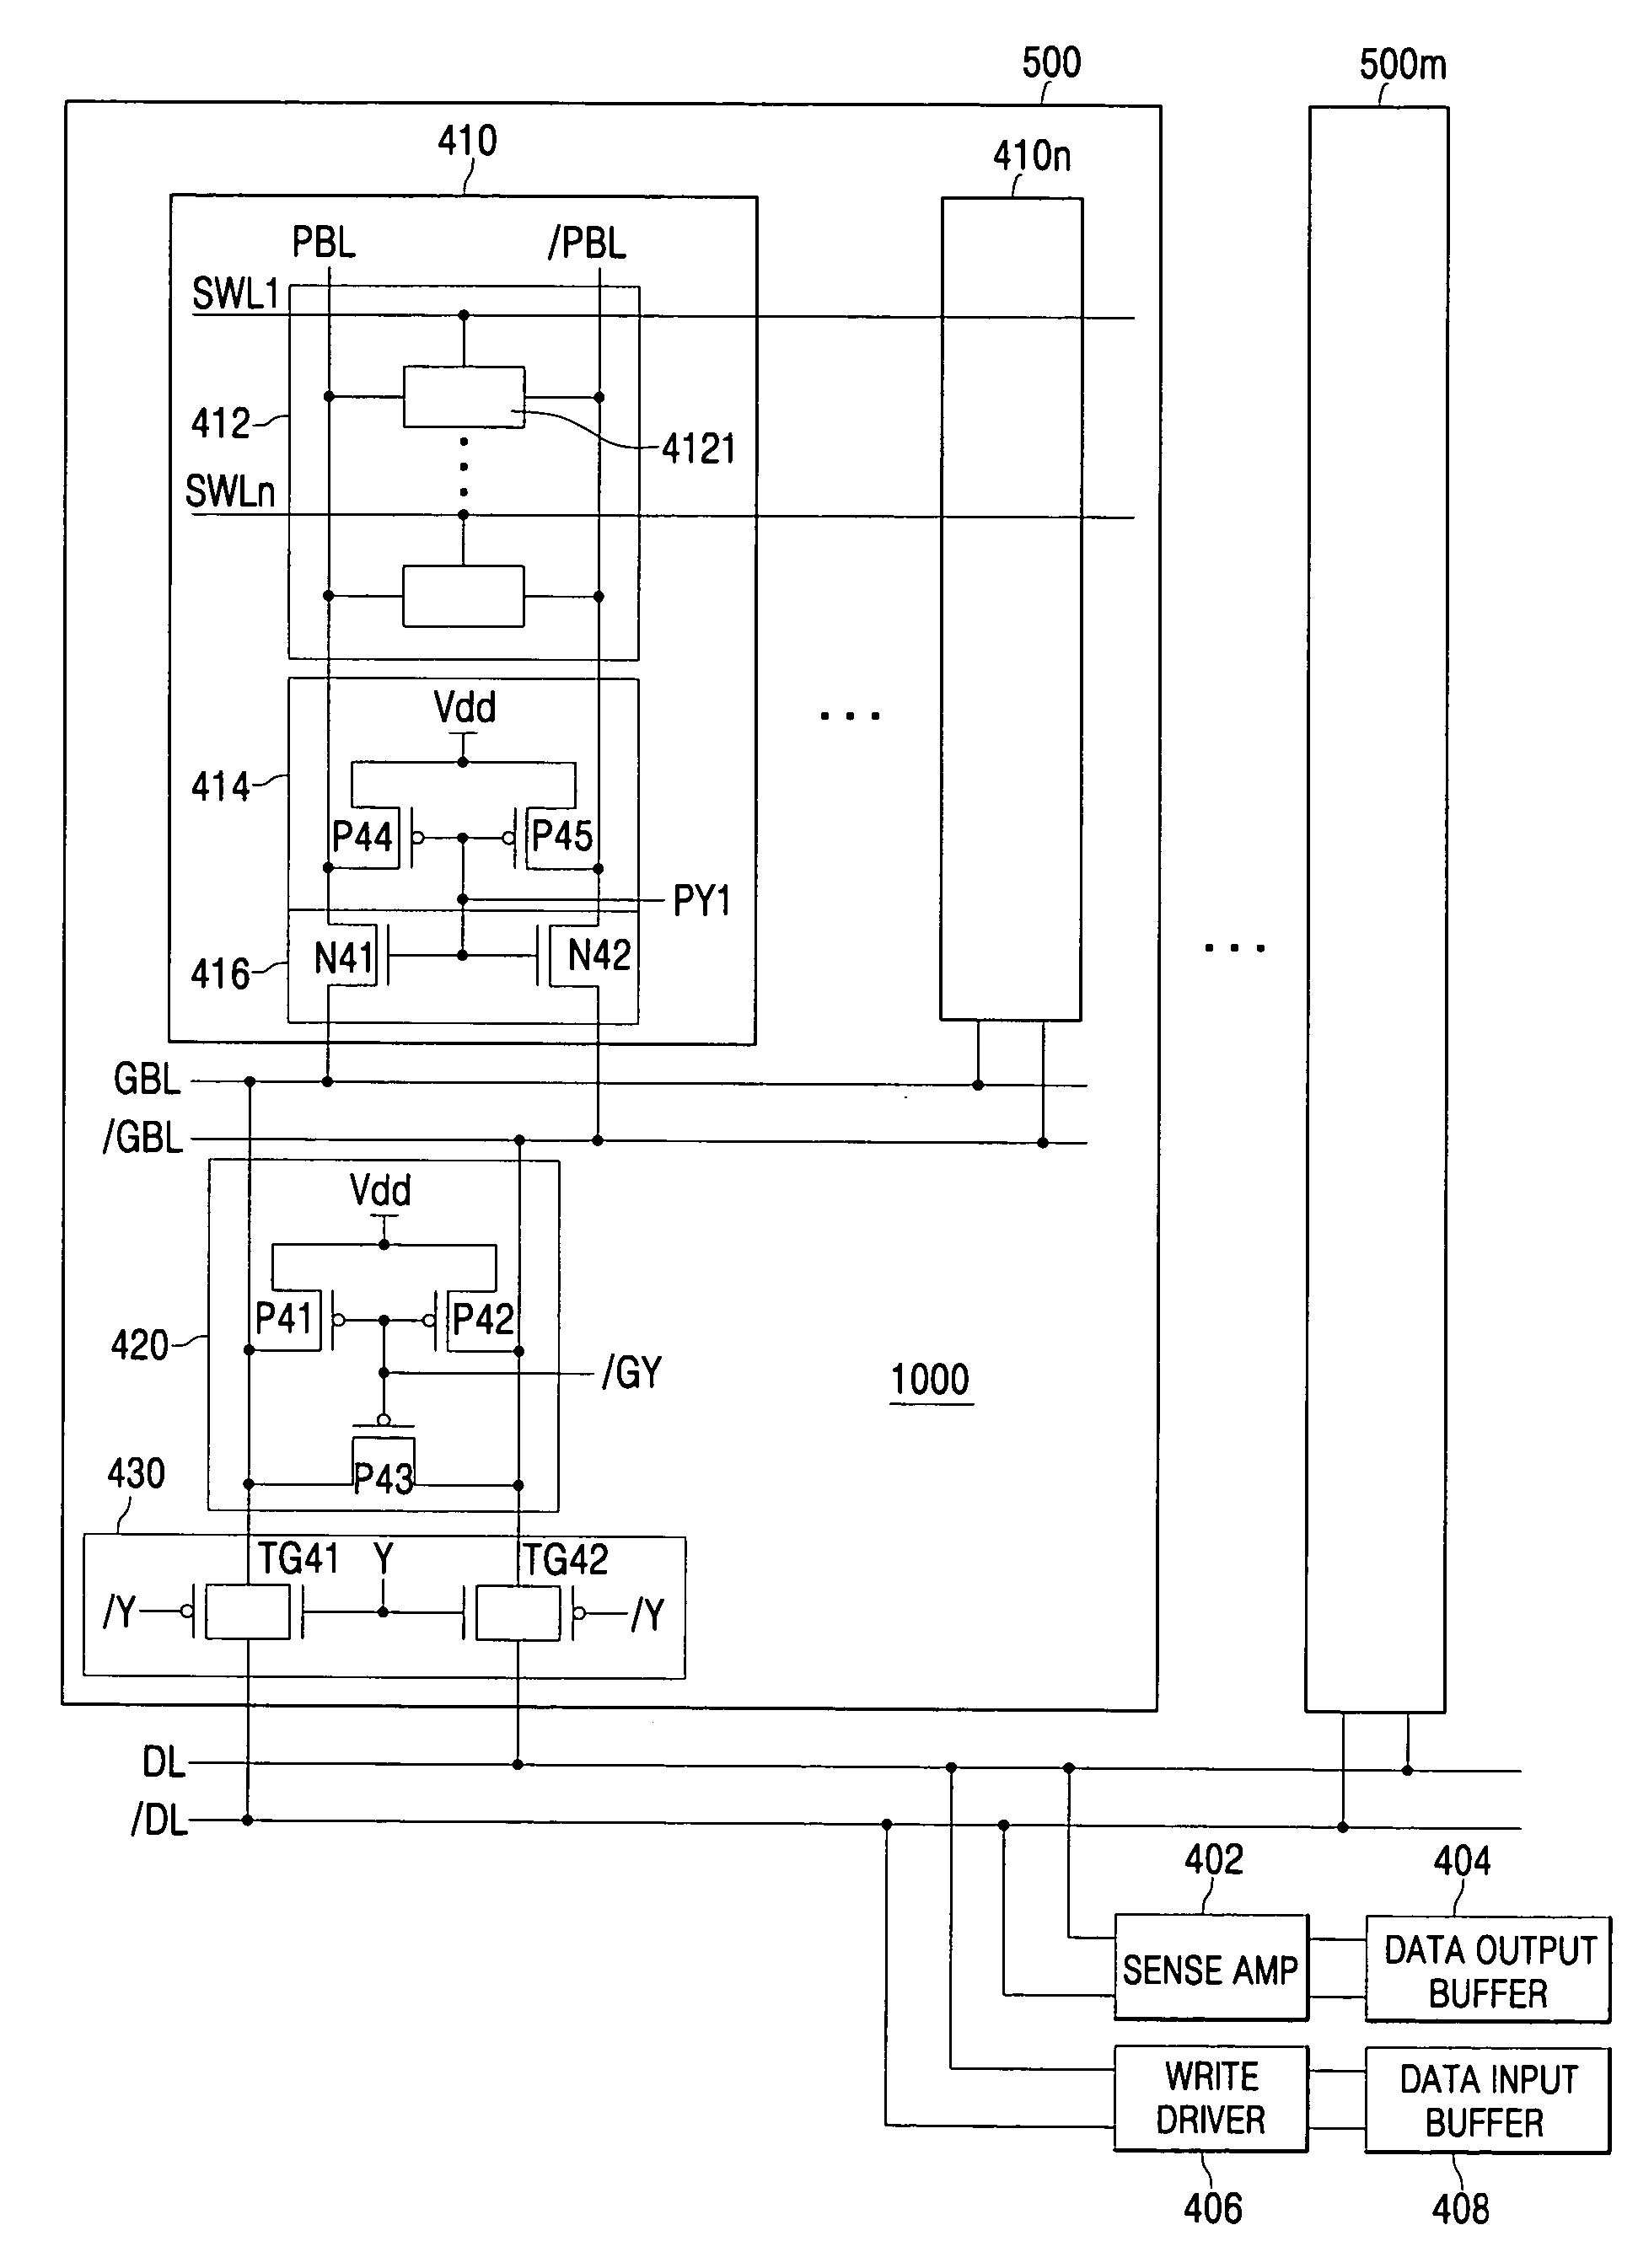 Integrated circuit memory devices having hierarchical bit line selection circuits therein